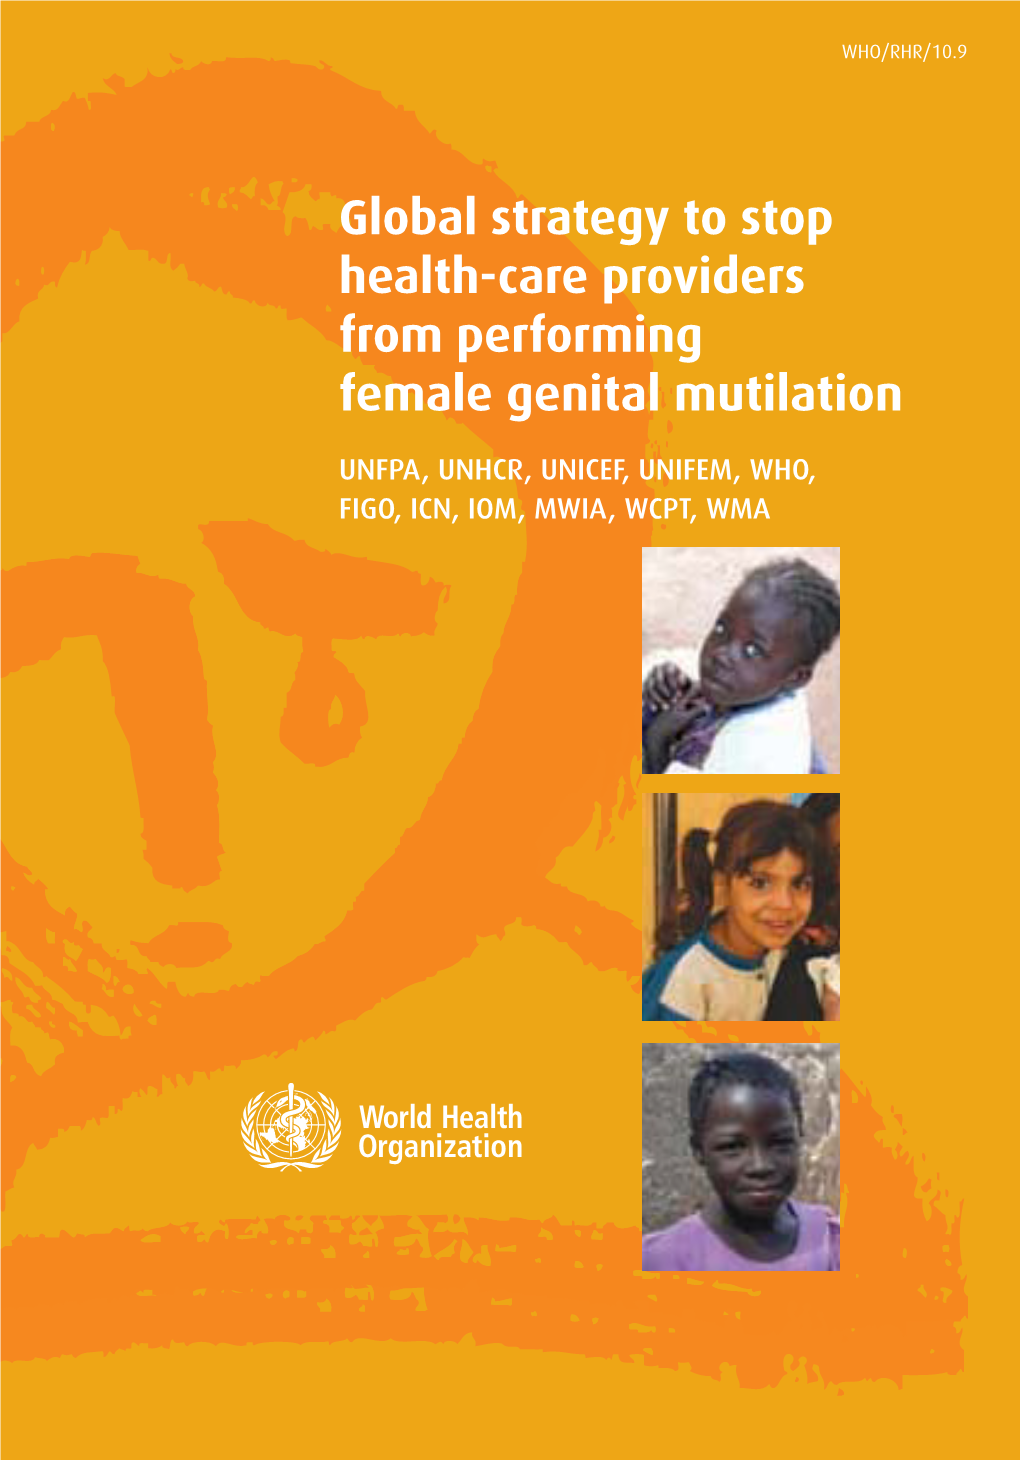 Global Strategy to Stop Health-Care Providers from Performing Female Genital Mutilation UNFPA, UNHCR, UNICEF, UNIFEM, WHO, FIGO, ICN, IOM, MWIA, WCPT, WMA